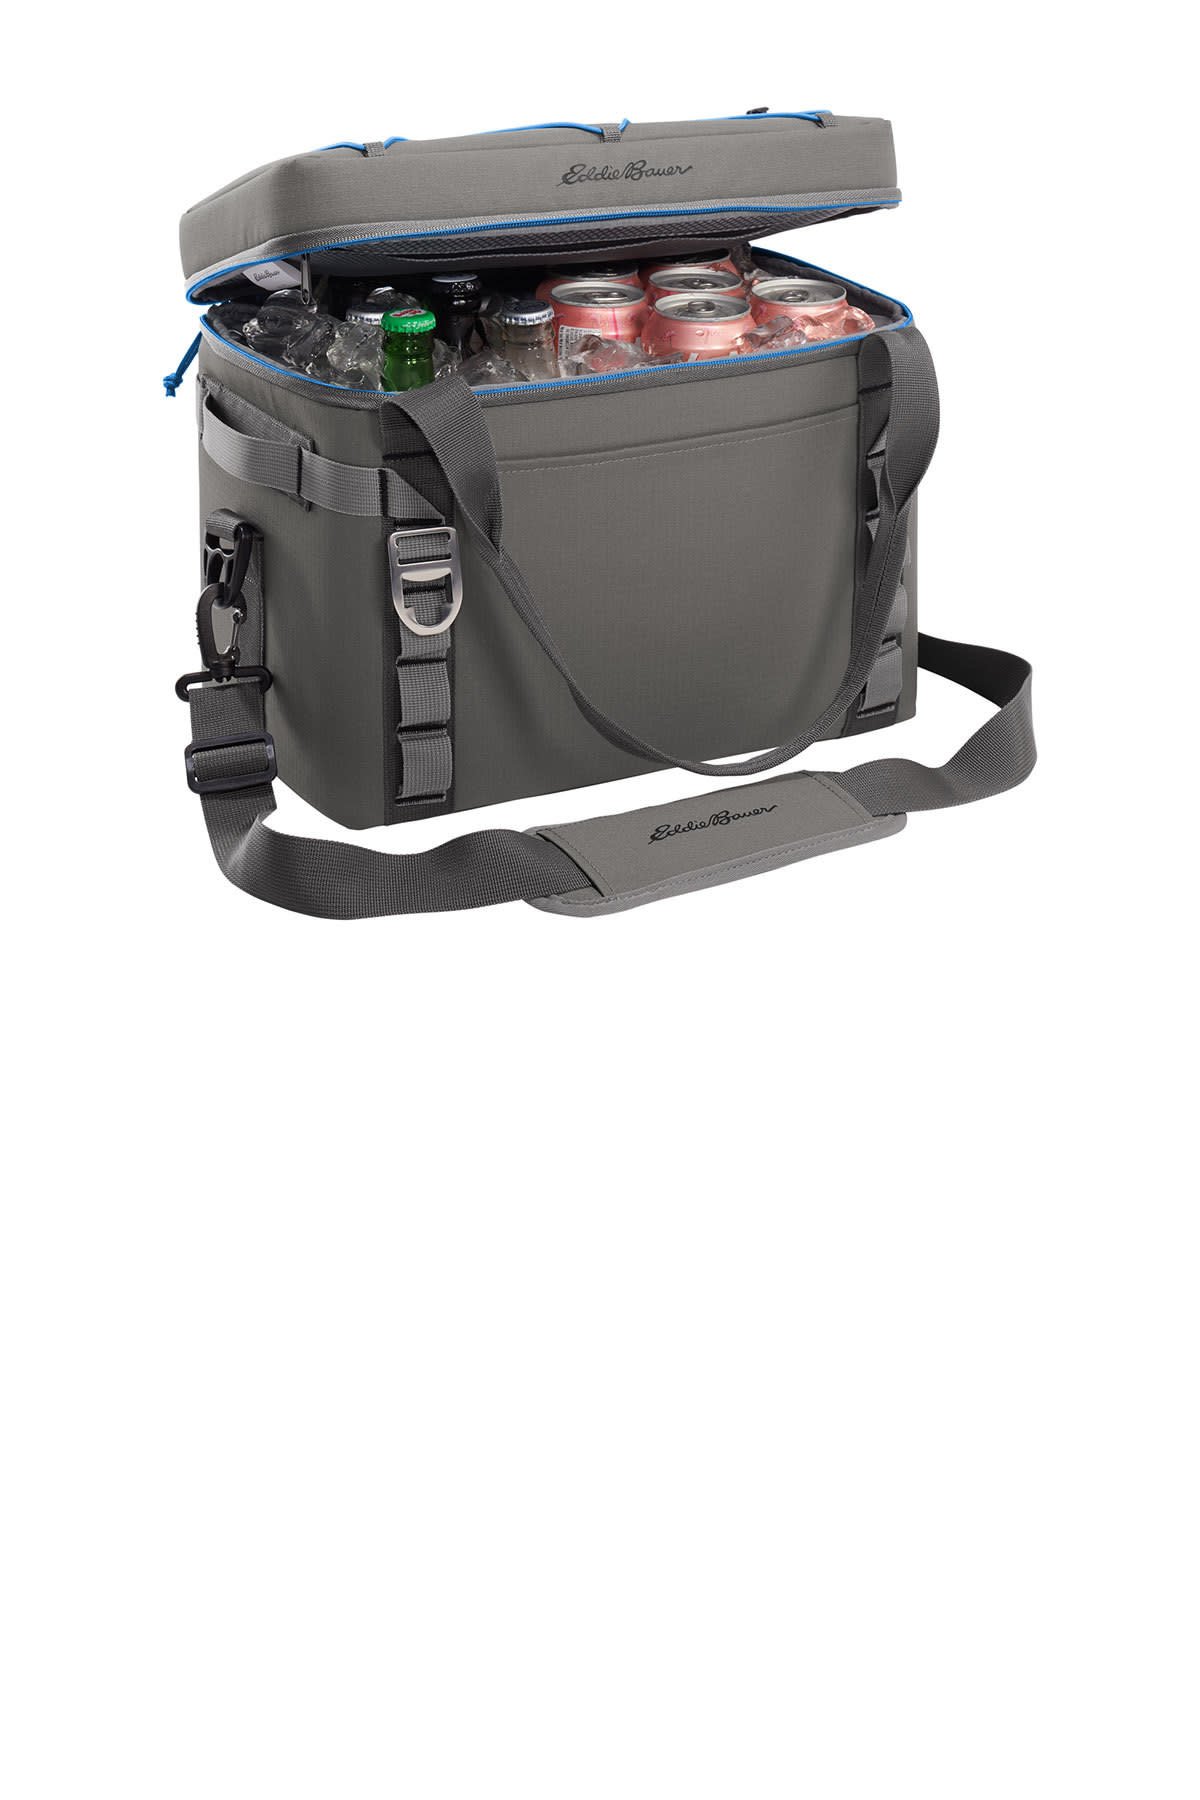 Eddie Bauer ® Max Cool 24-Can Cooler DWH